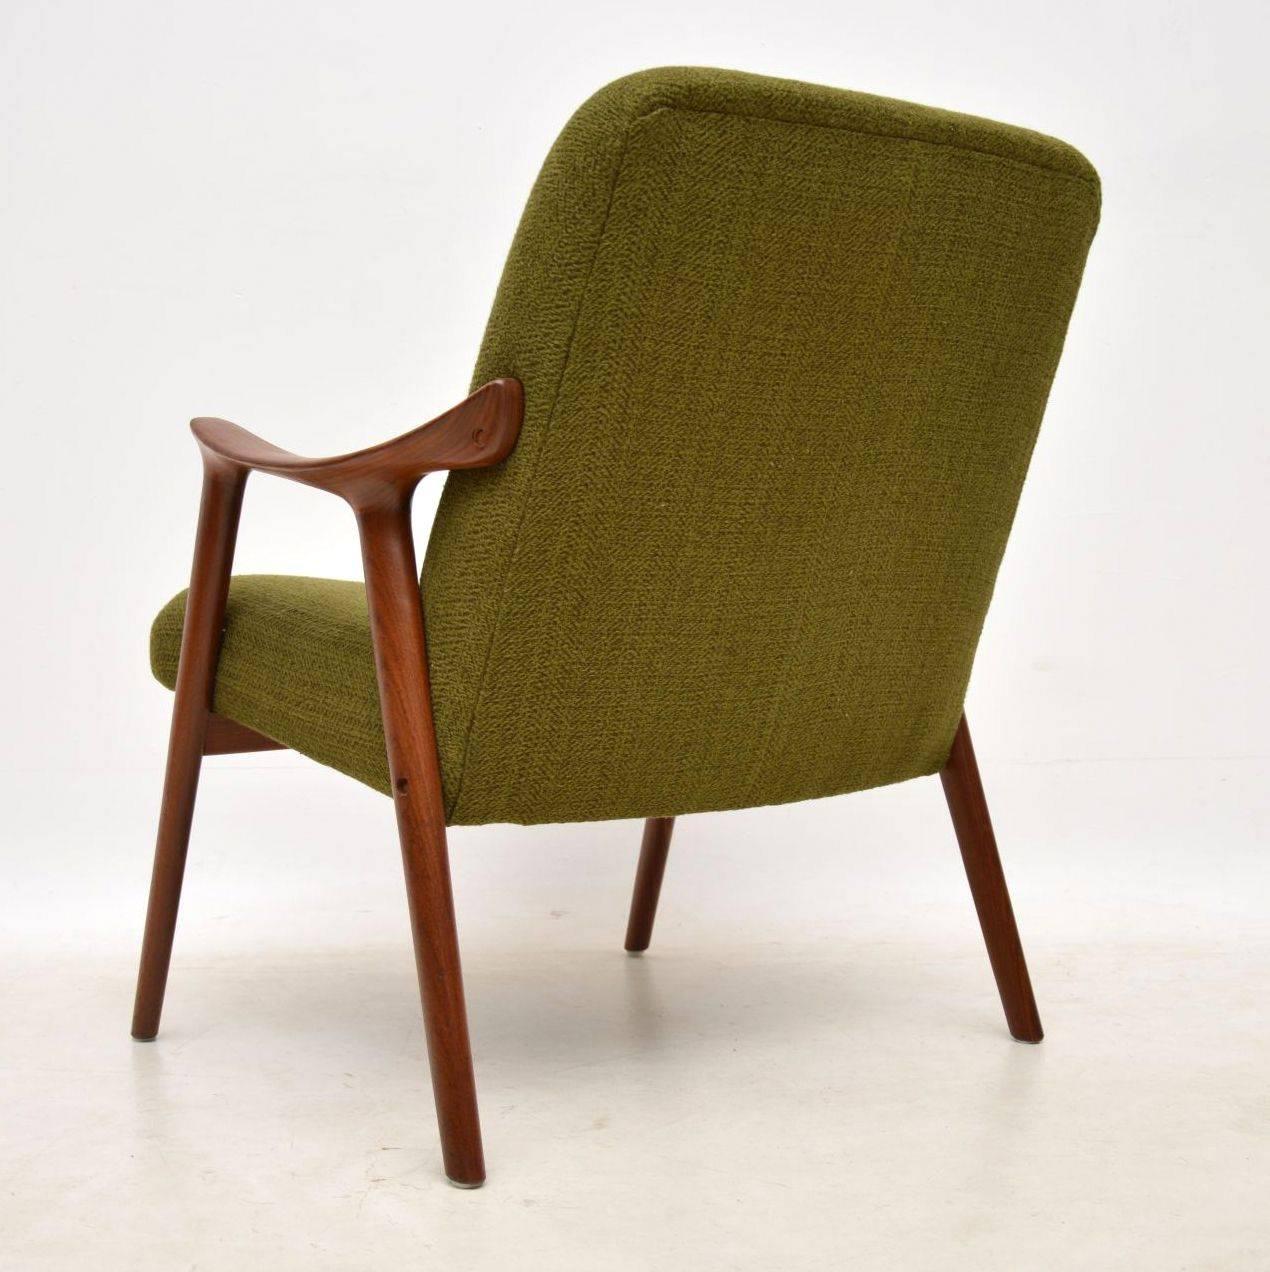 1960s Vintage Afromosia Armchair by Ingmar Relling for Westnofa 1